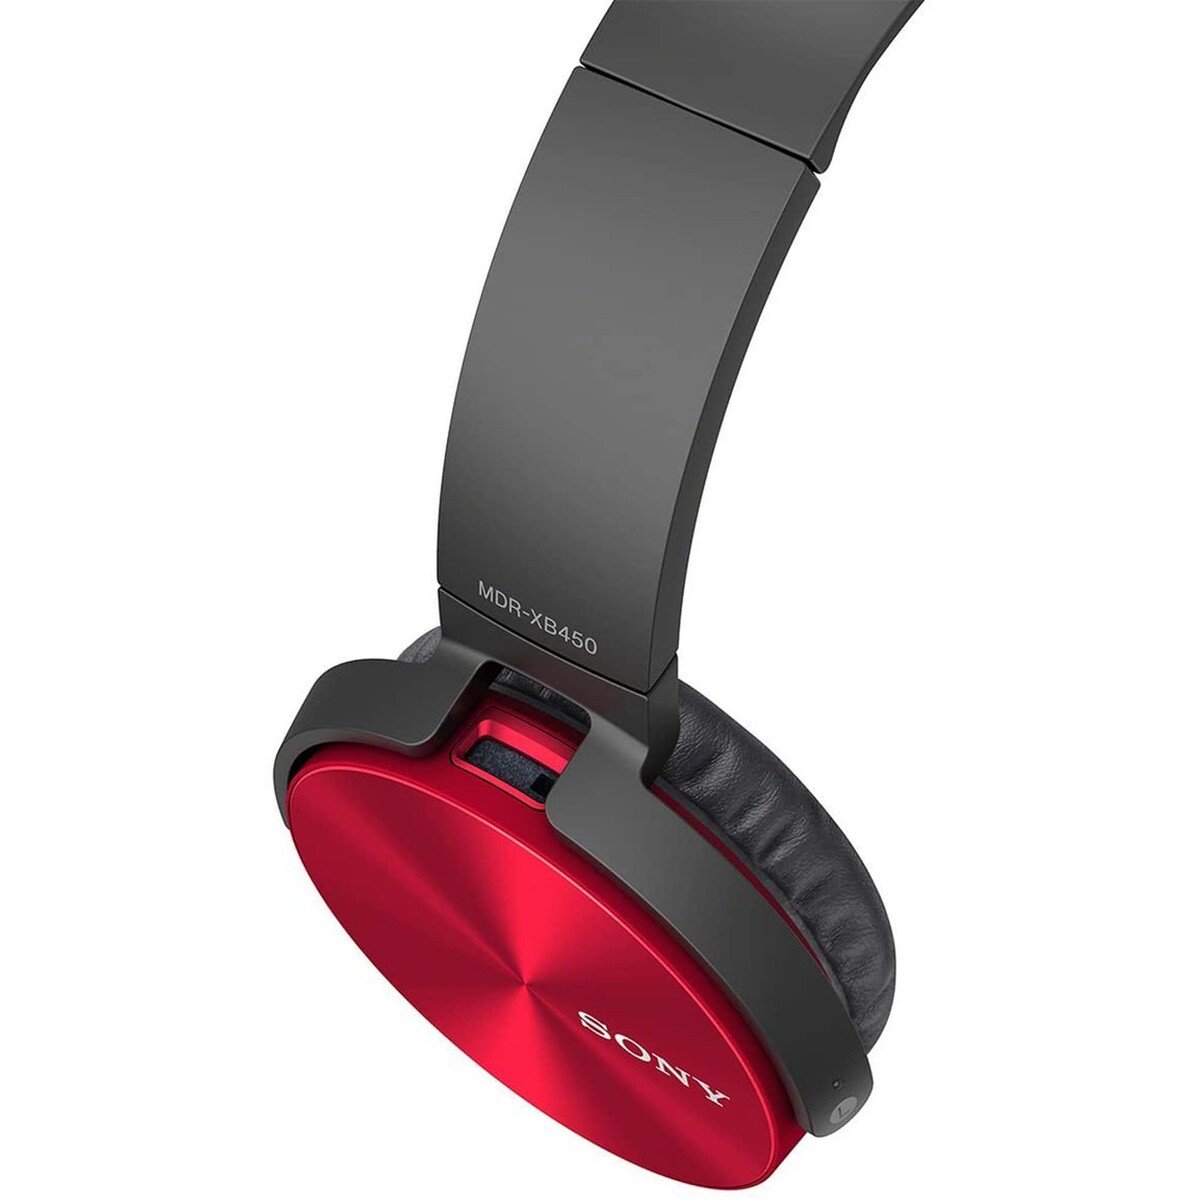 Sony Extra Bass Wired on-ear Headphone MDR-XB450AP Red